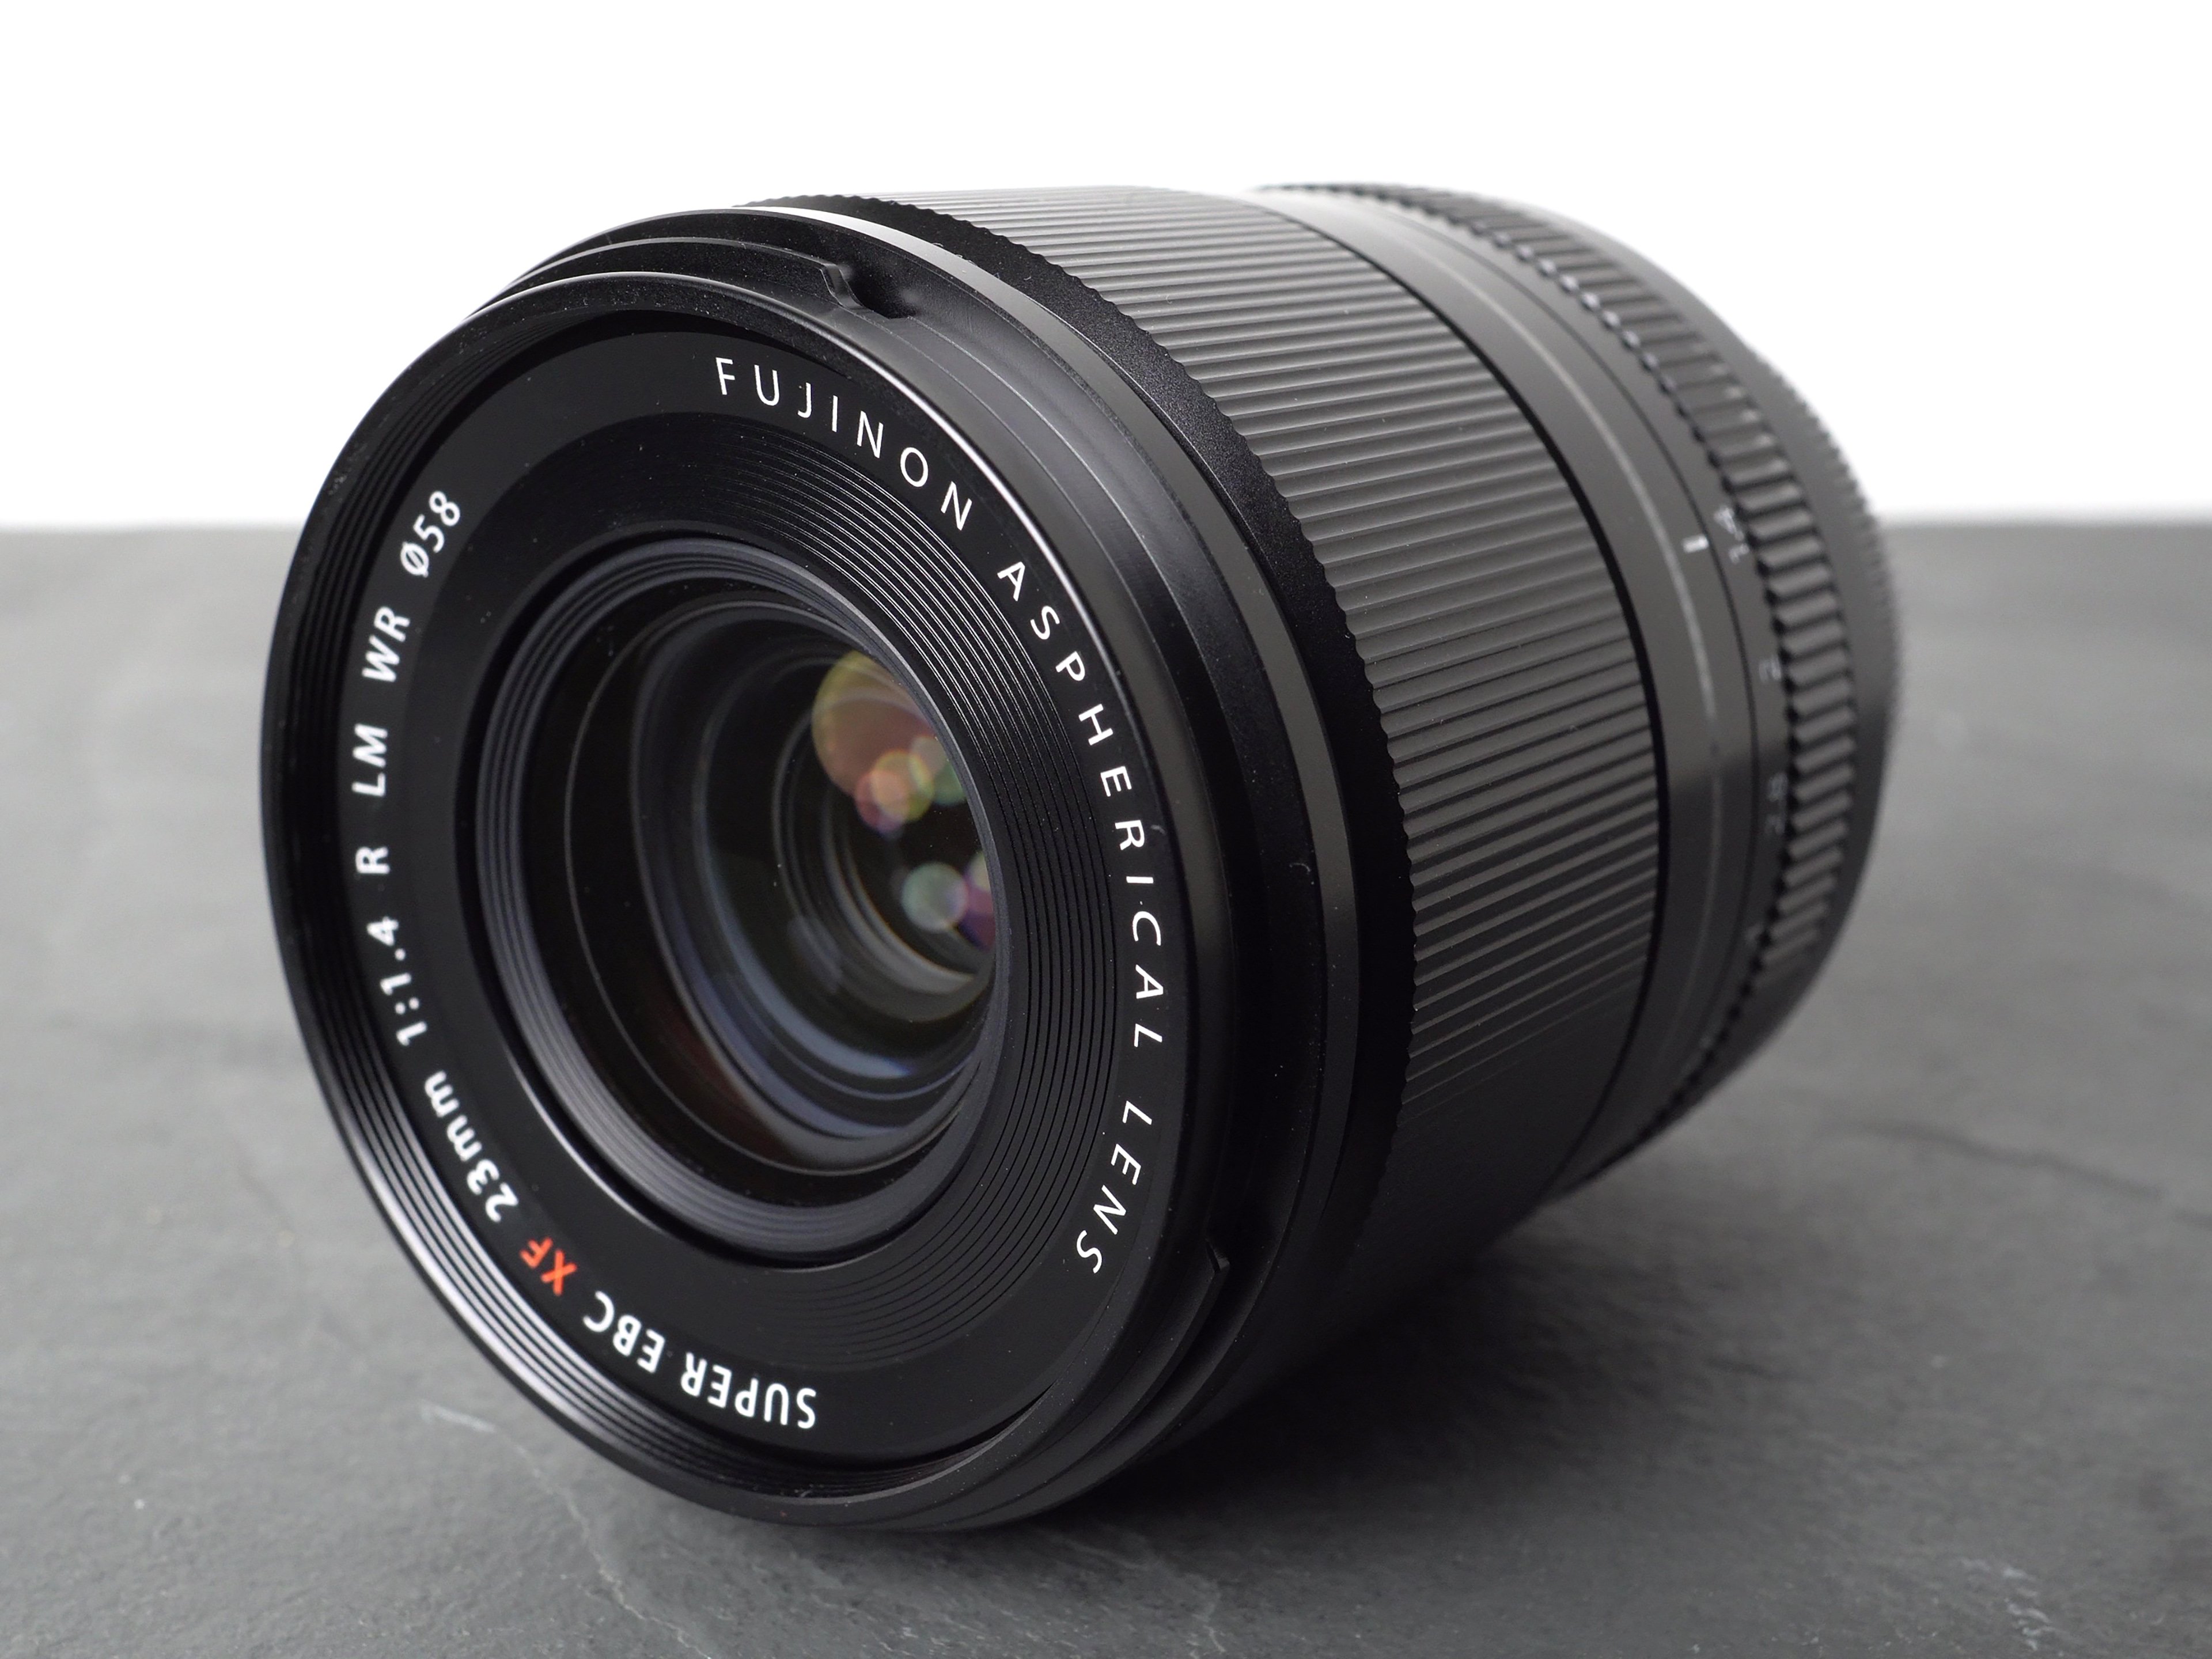 Fujifilm XF 23mm f1.4 R LM WR review | Cameralabs